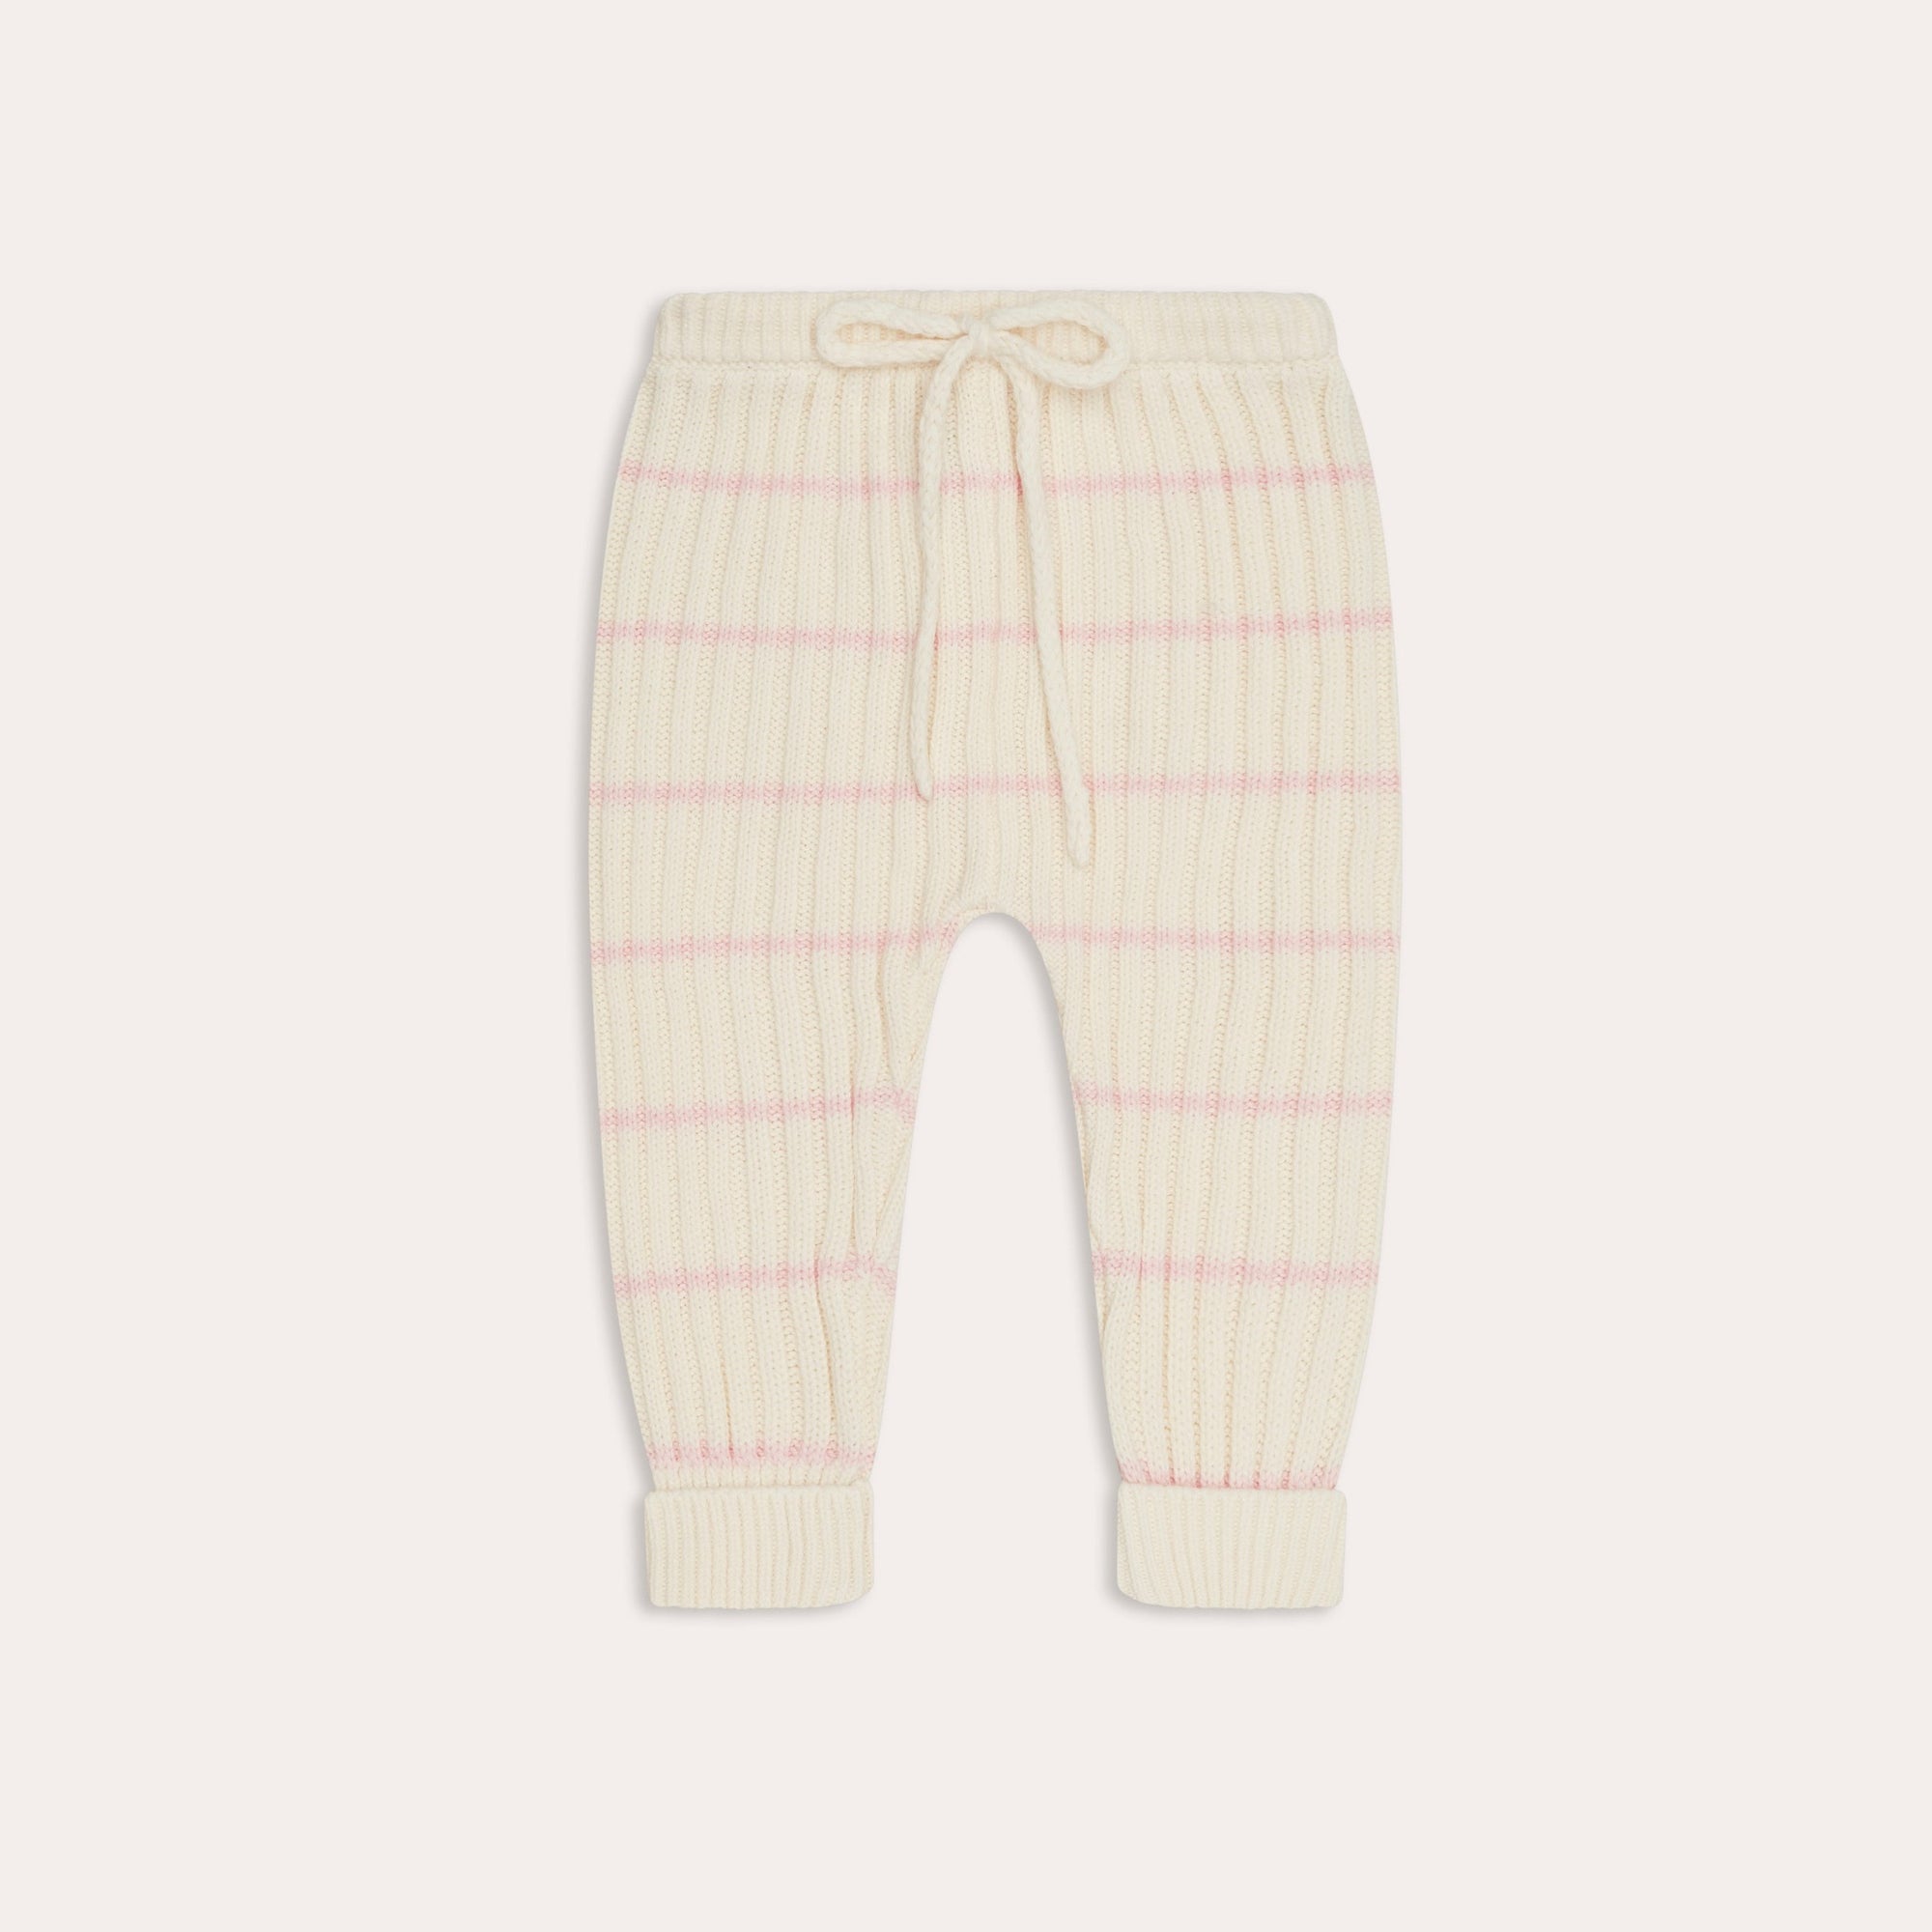 These illoura knit joey pants | pink stripe from Illoura the Label are made from organic cotton knit and have an elasticated waist, perfect for a baby. They come in a cute white and pink striped design.